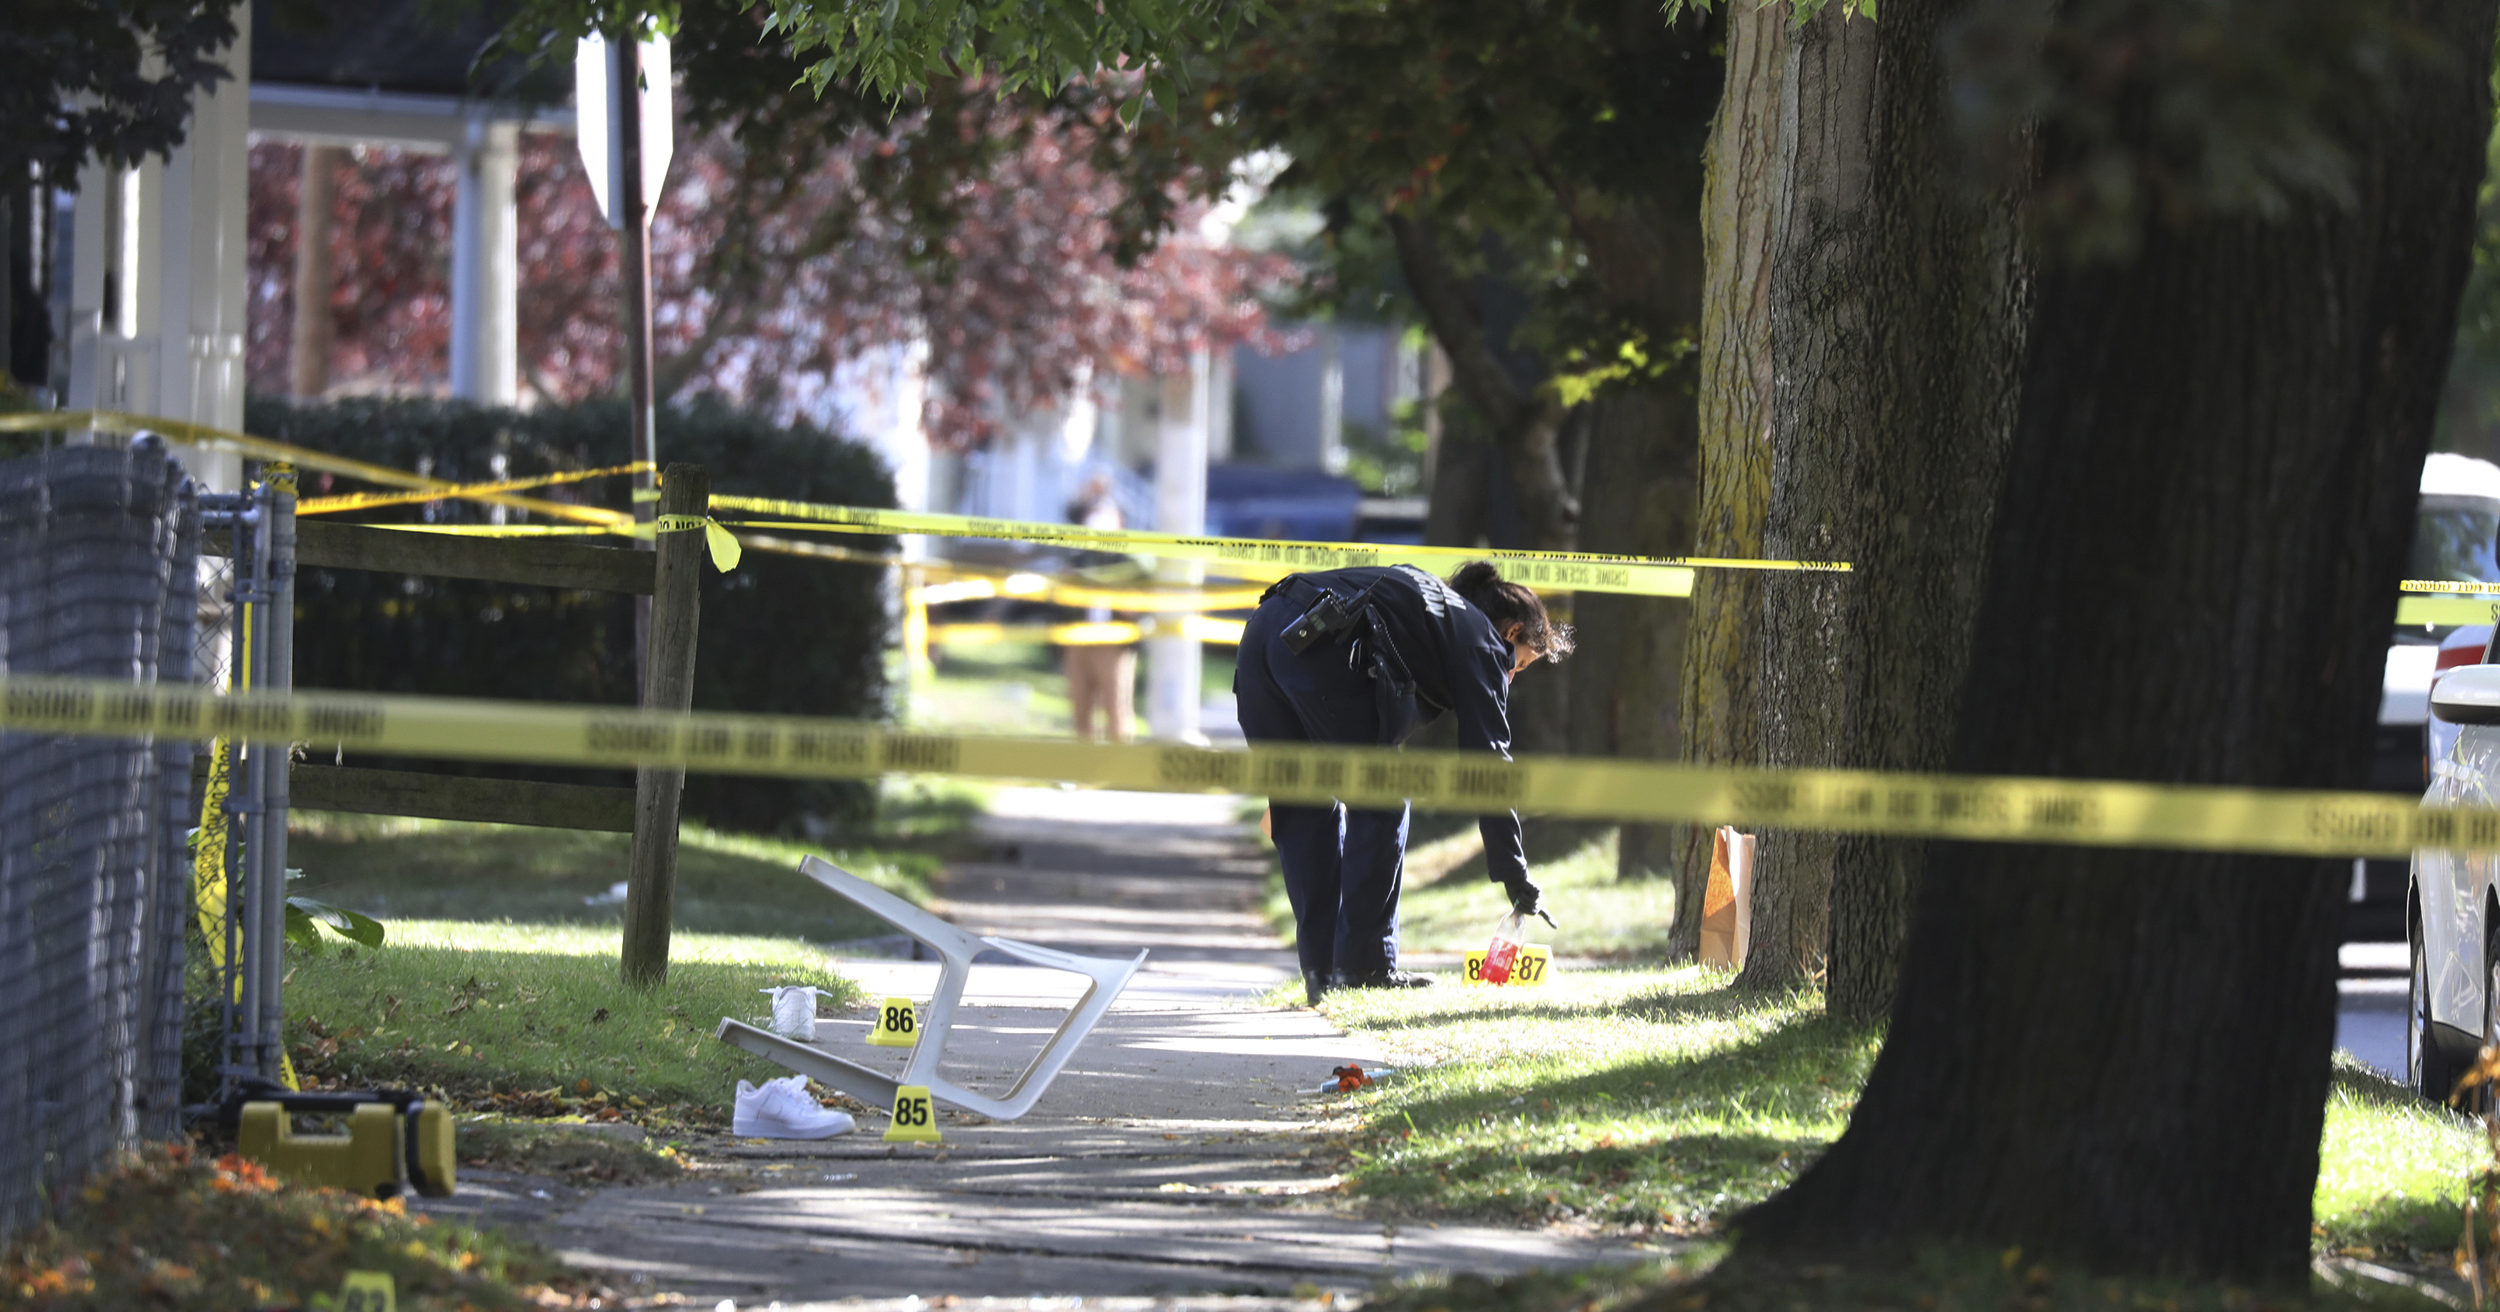 A Rochester police technician picks up items as evidence near the home where a fatal shooting took place on Sept. 19, 2020, in Rochester, New York.